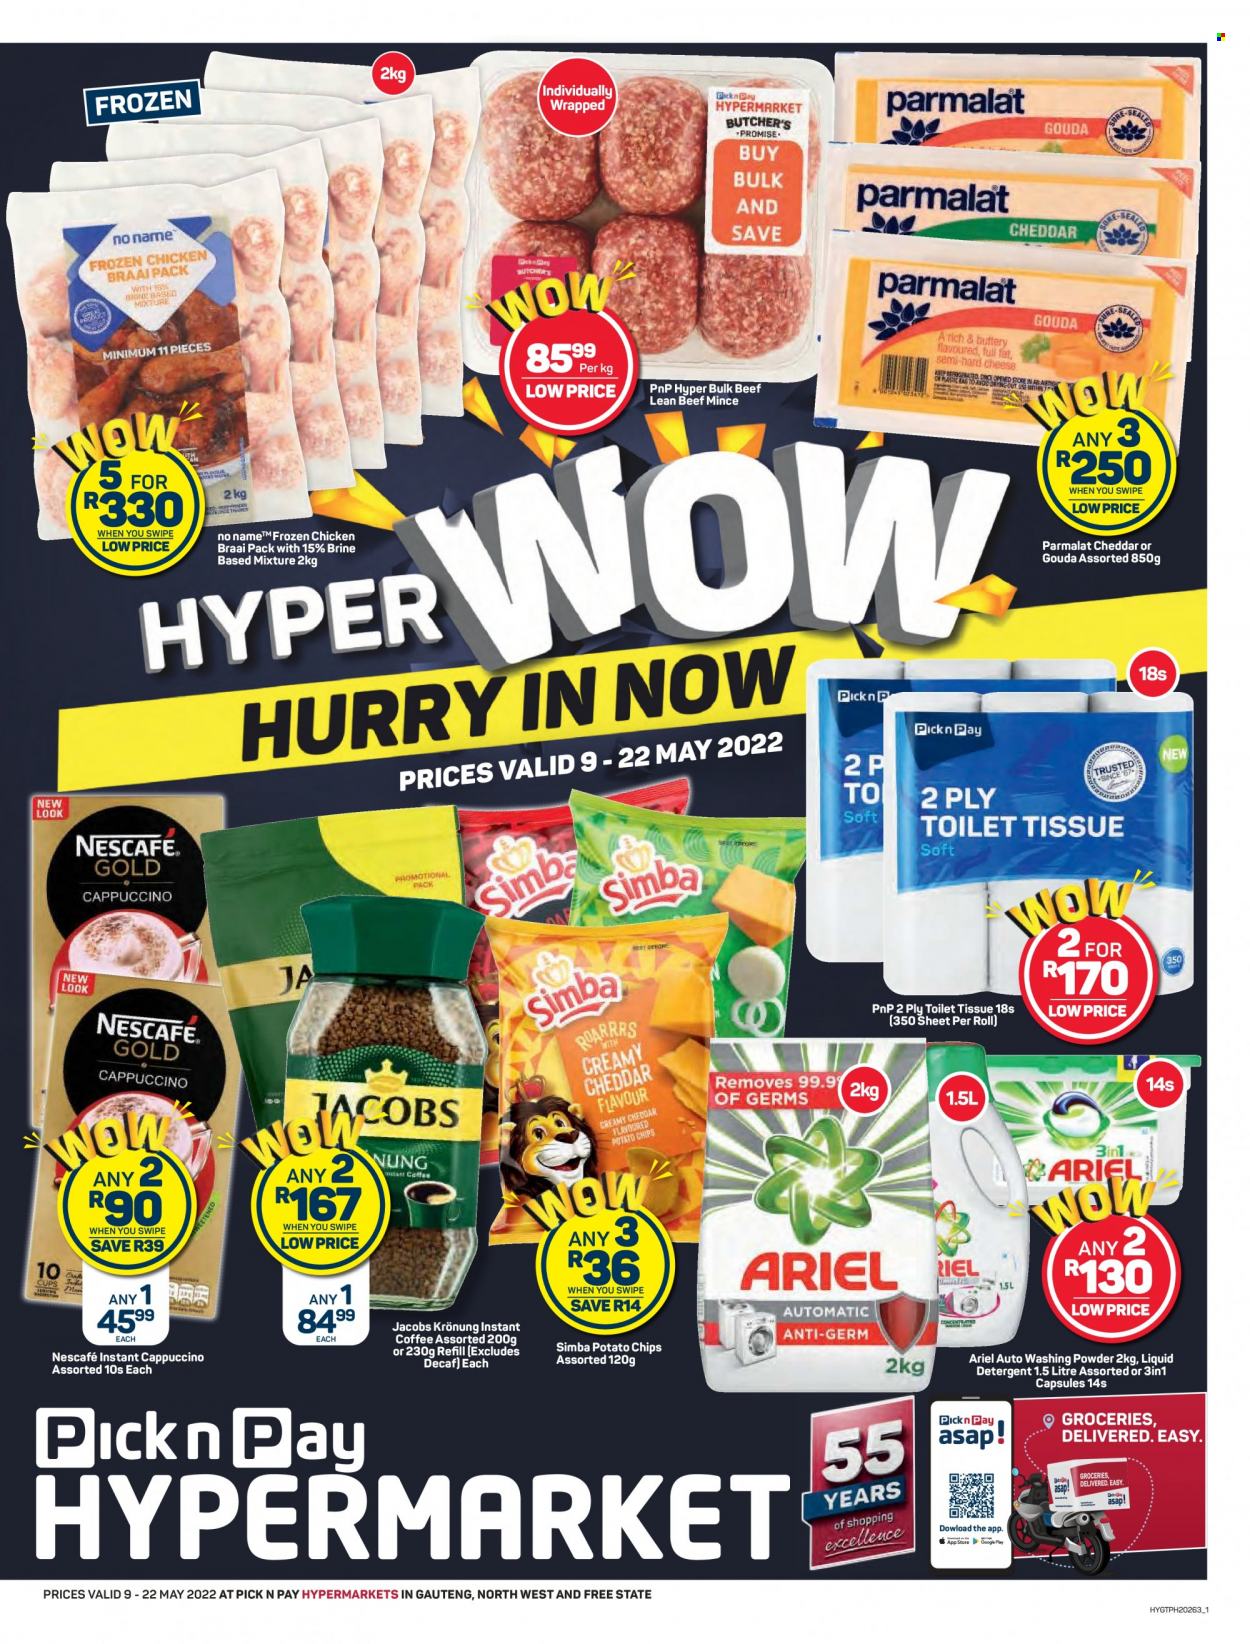 Pick n Pay Hypermarket catalogue  - 09/05/2022 - 22/05/2022 - Sales products - No Name, gouda, cheese, Parmalat, potato chips, Simba, cappuccino, instant coffee, Jacobs, Nescafé, Jacobs Krönung, chicken meat, beef meat, ground beef, toilet paper, detergent, Ariel, liquid detergent, laundry powder. Page 1.